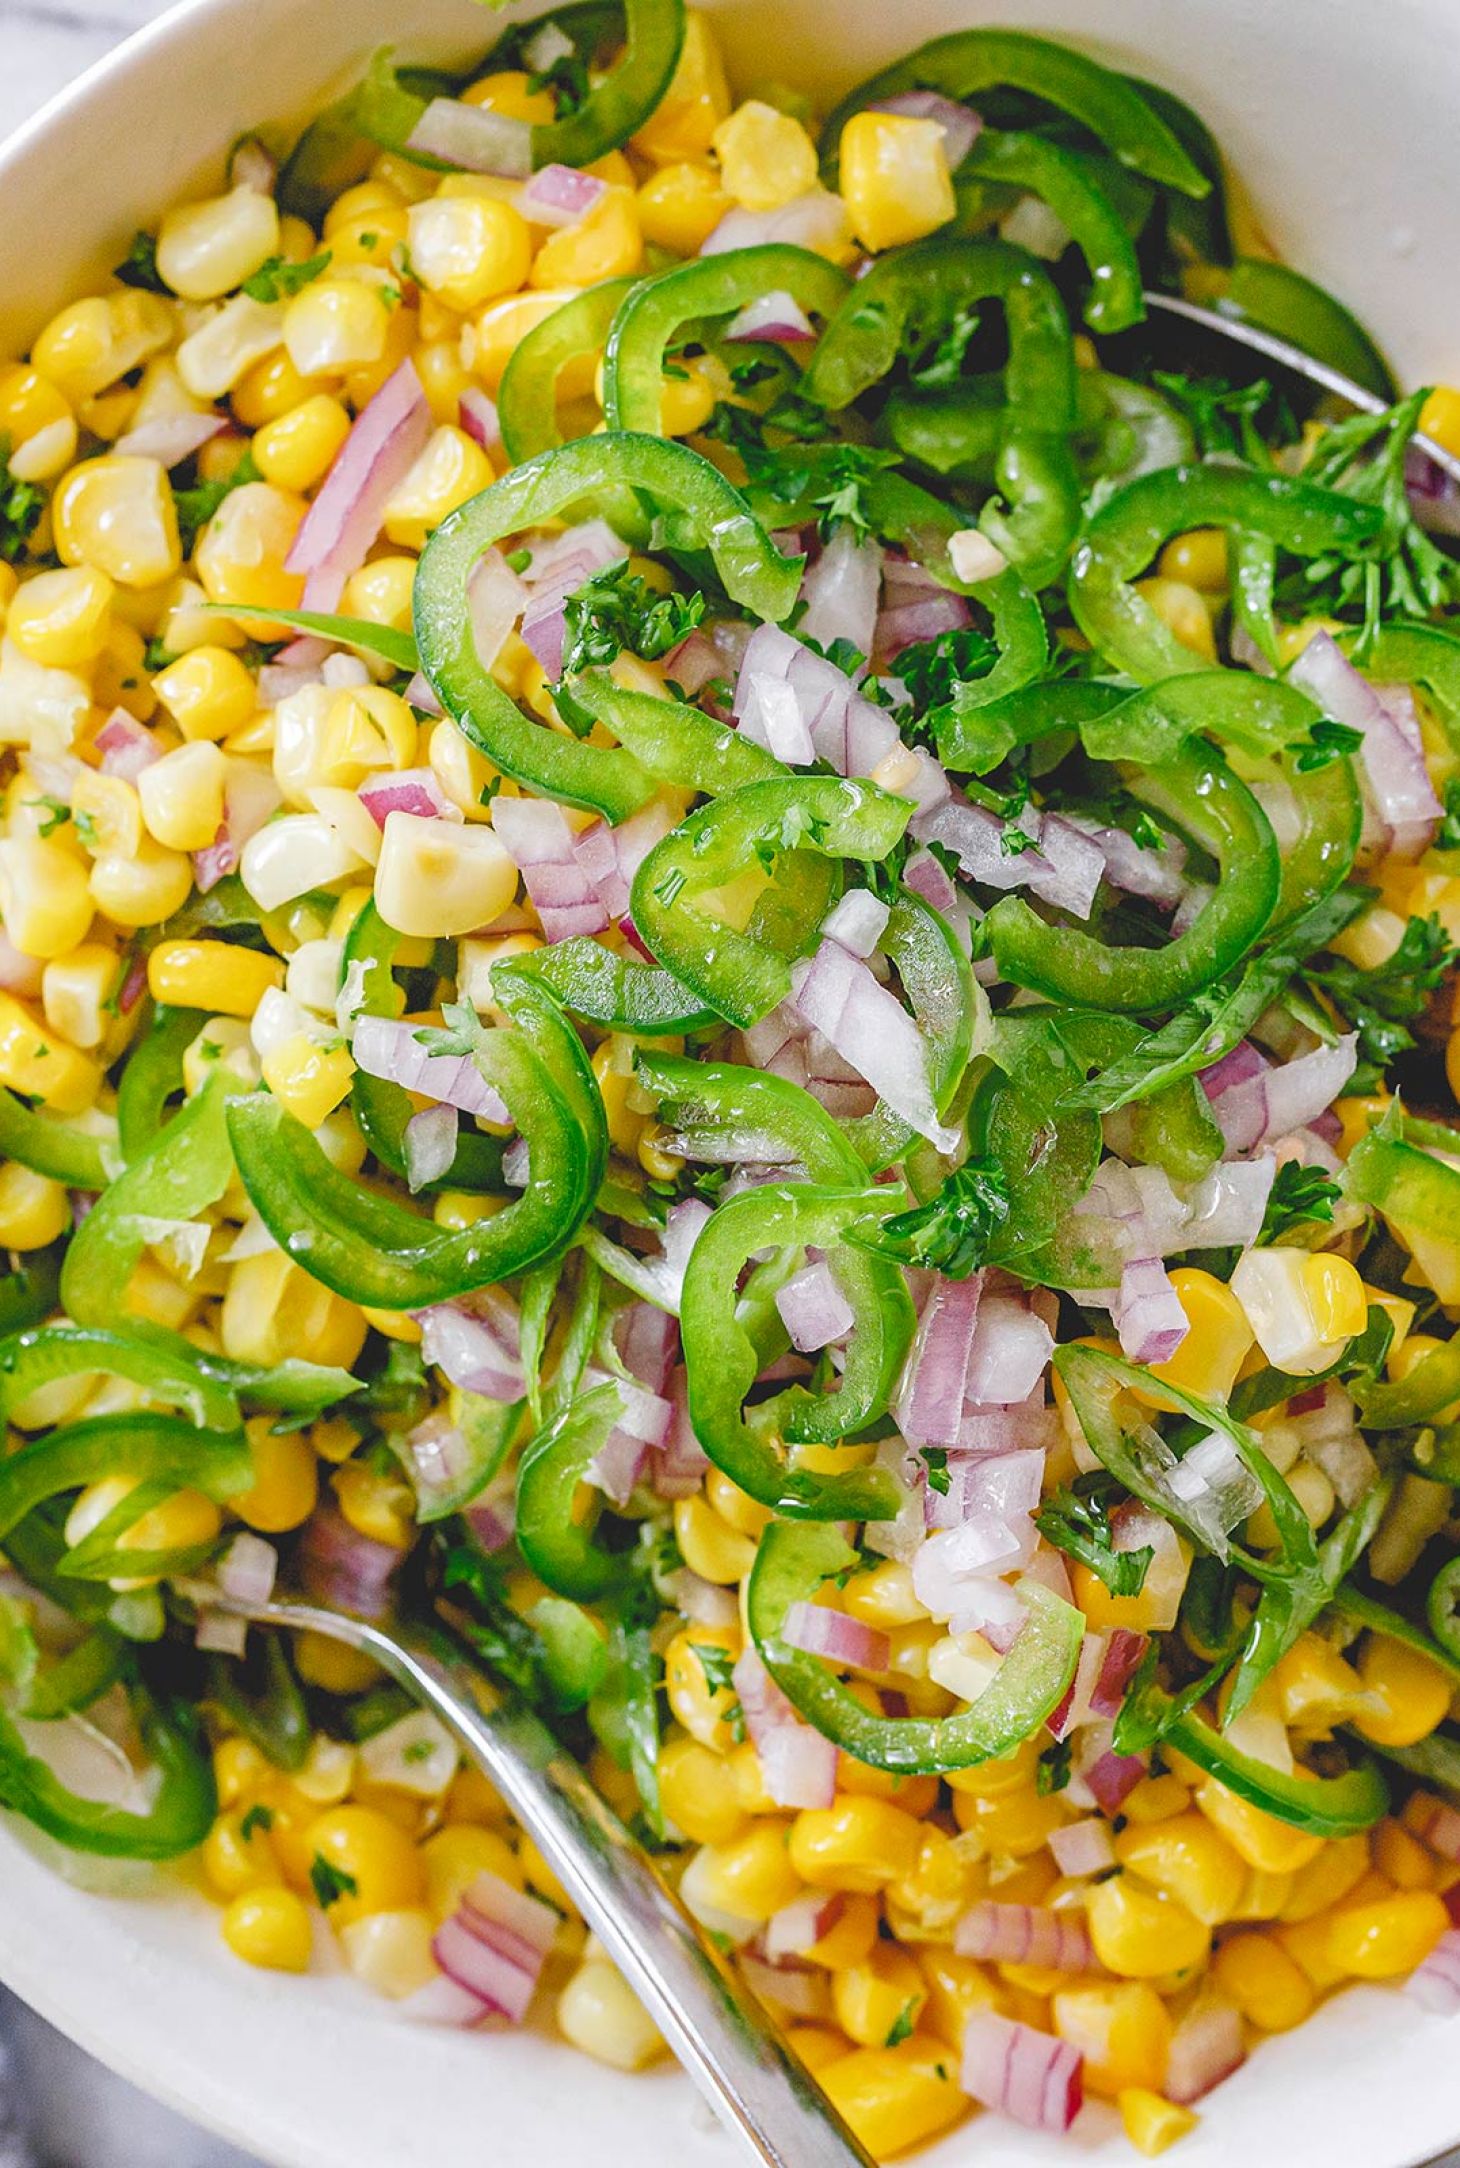 Grilled Butter Corn Salad with Jalapeño - #recipe by #eatwell101 - https://www.eatwell101.com/grilled-corn-salad-recipe